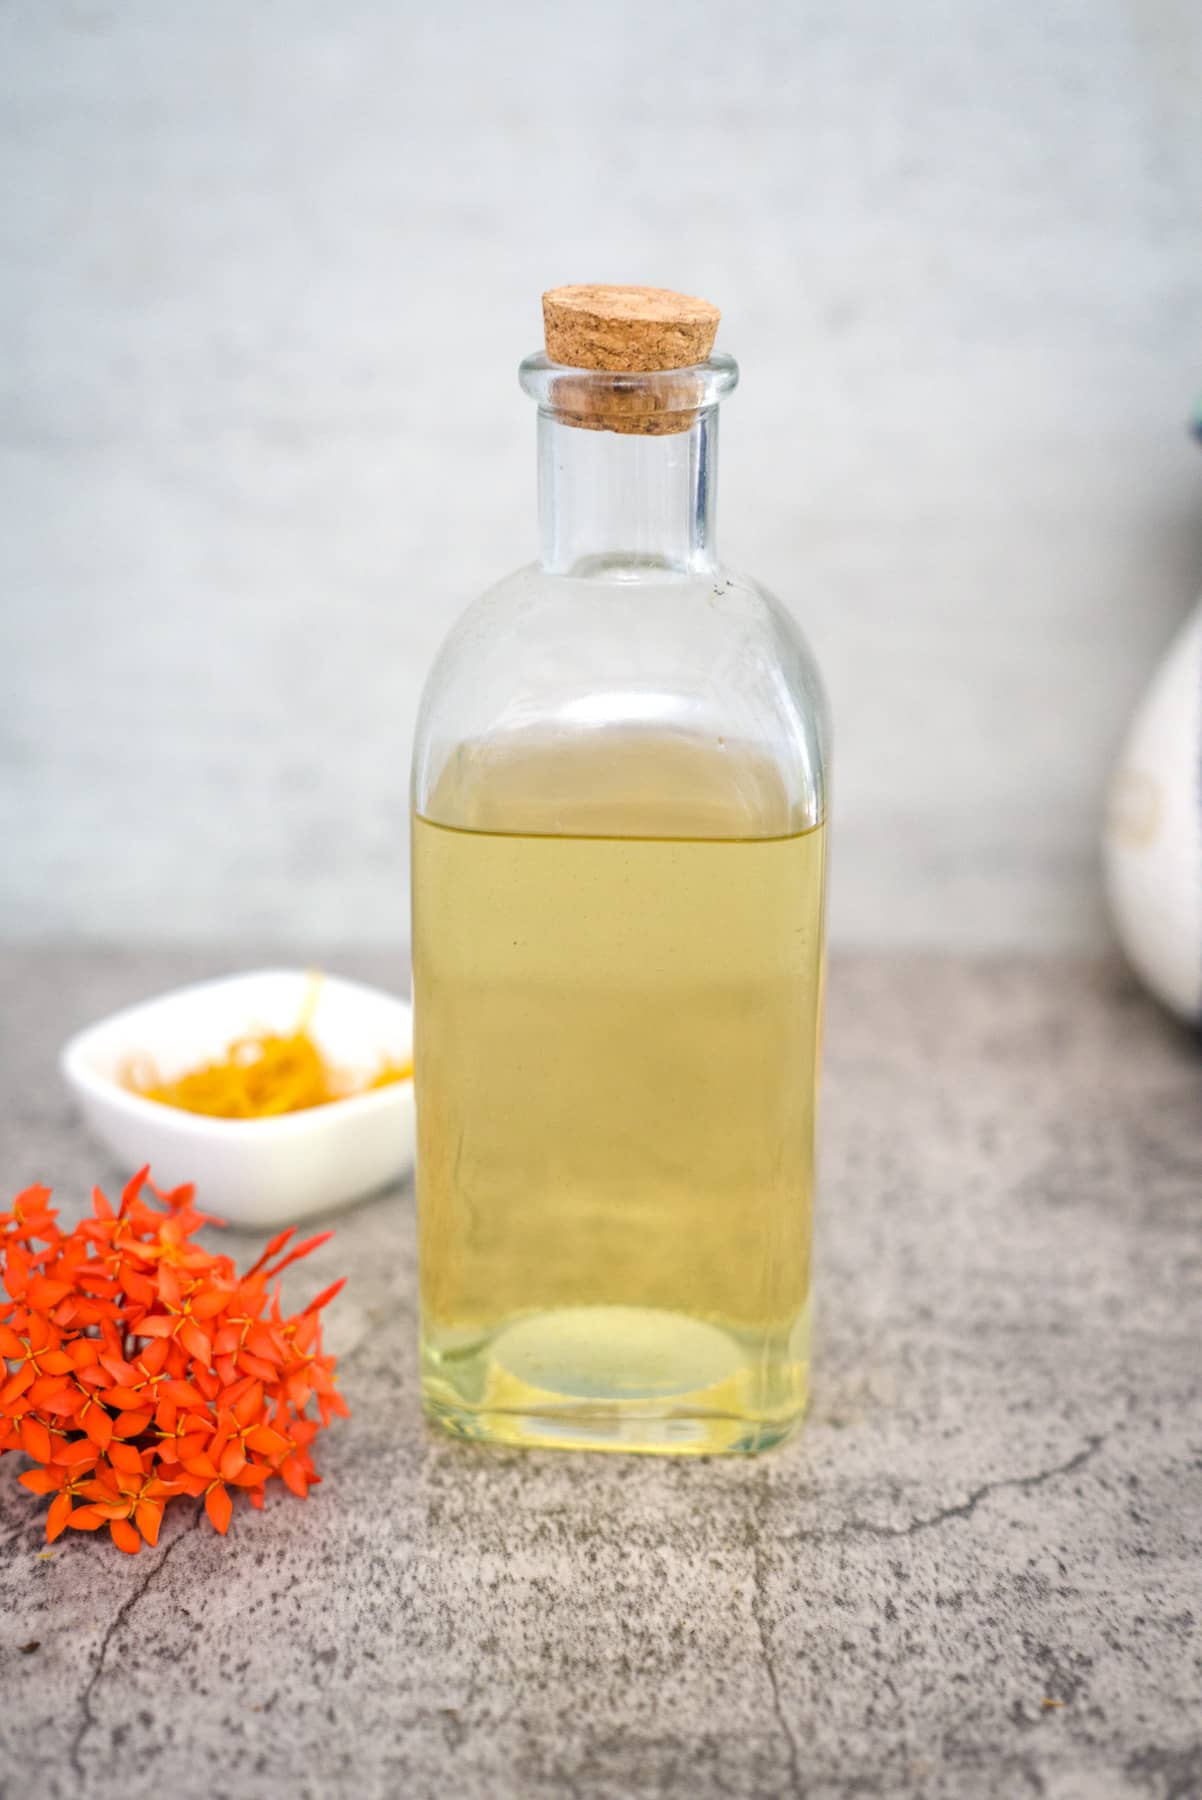 orange extract in a glass bottle